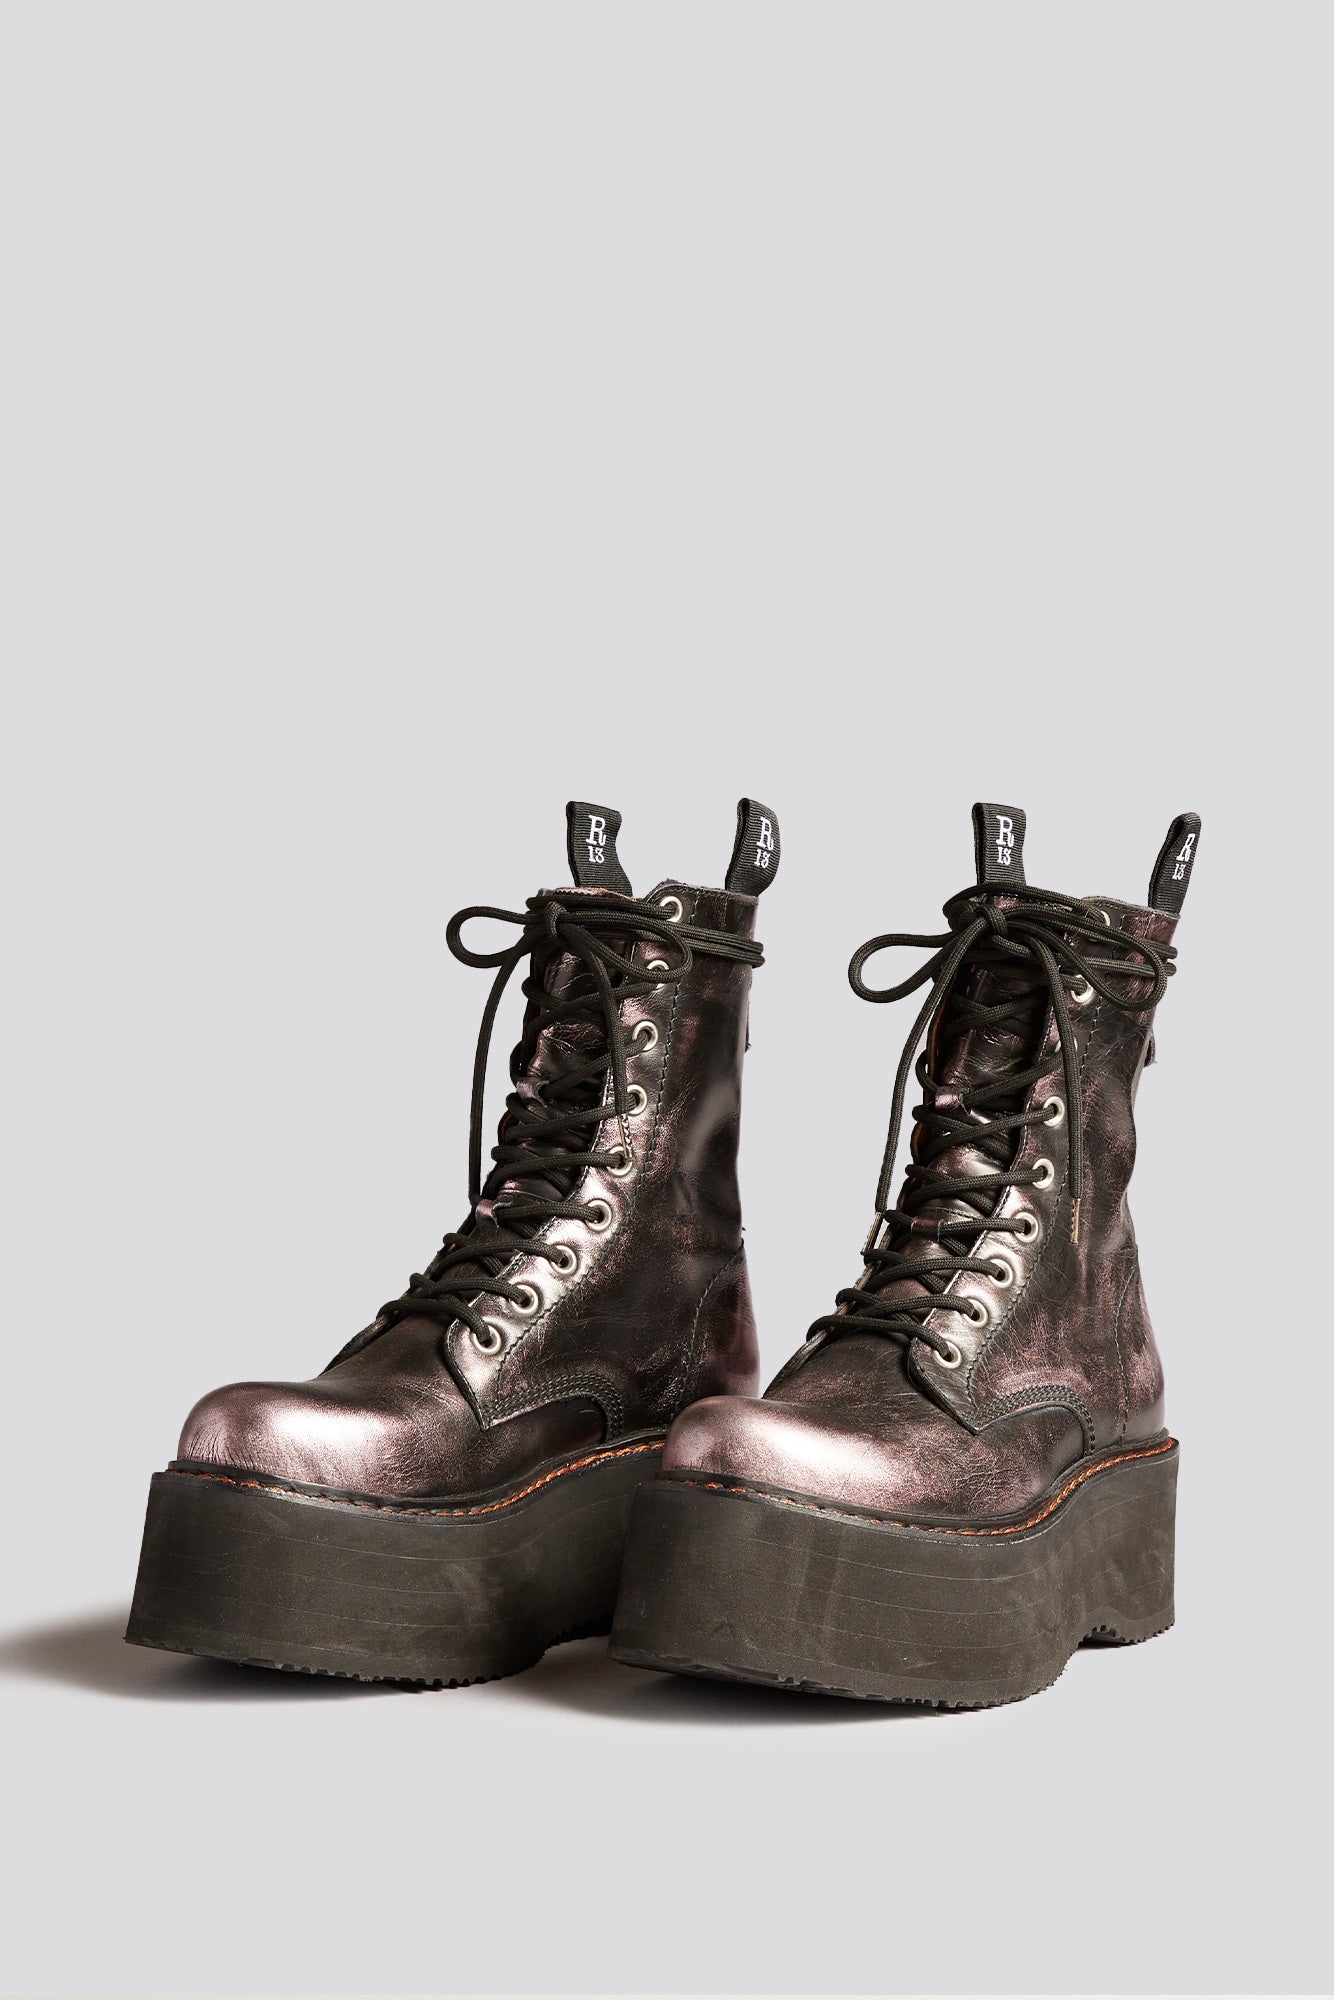 DOUBLE STACK BOOT - PINK SHINE - 1